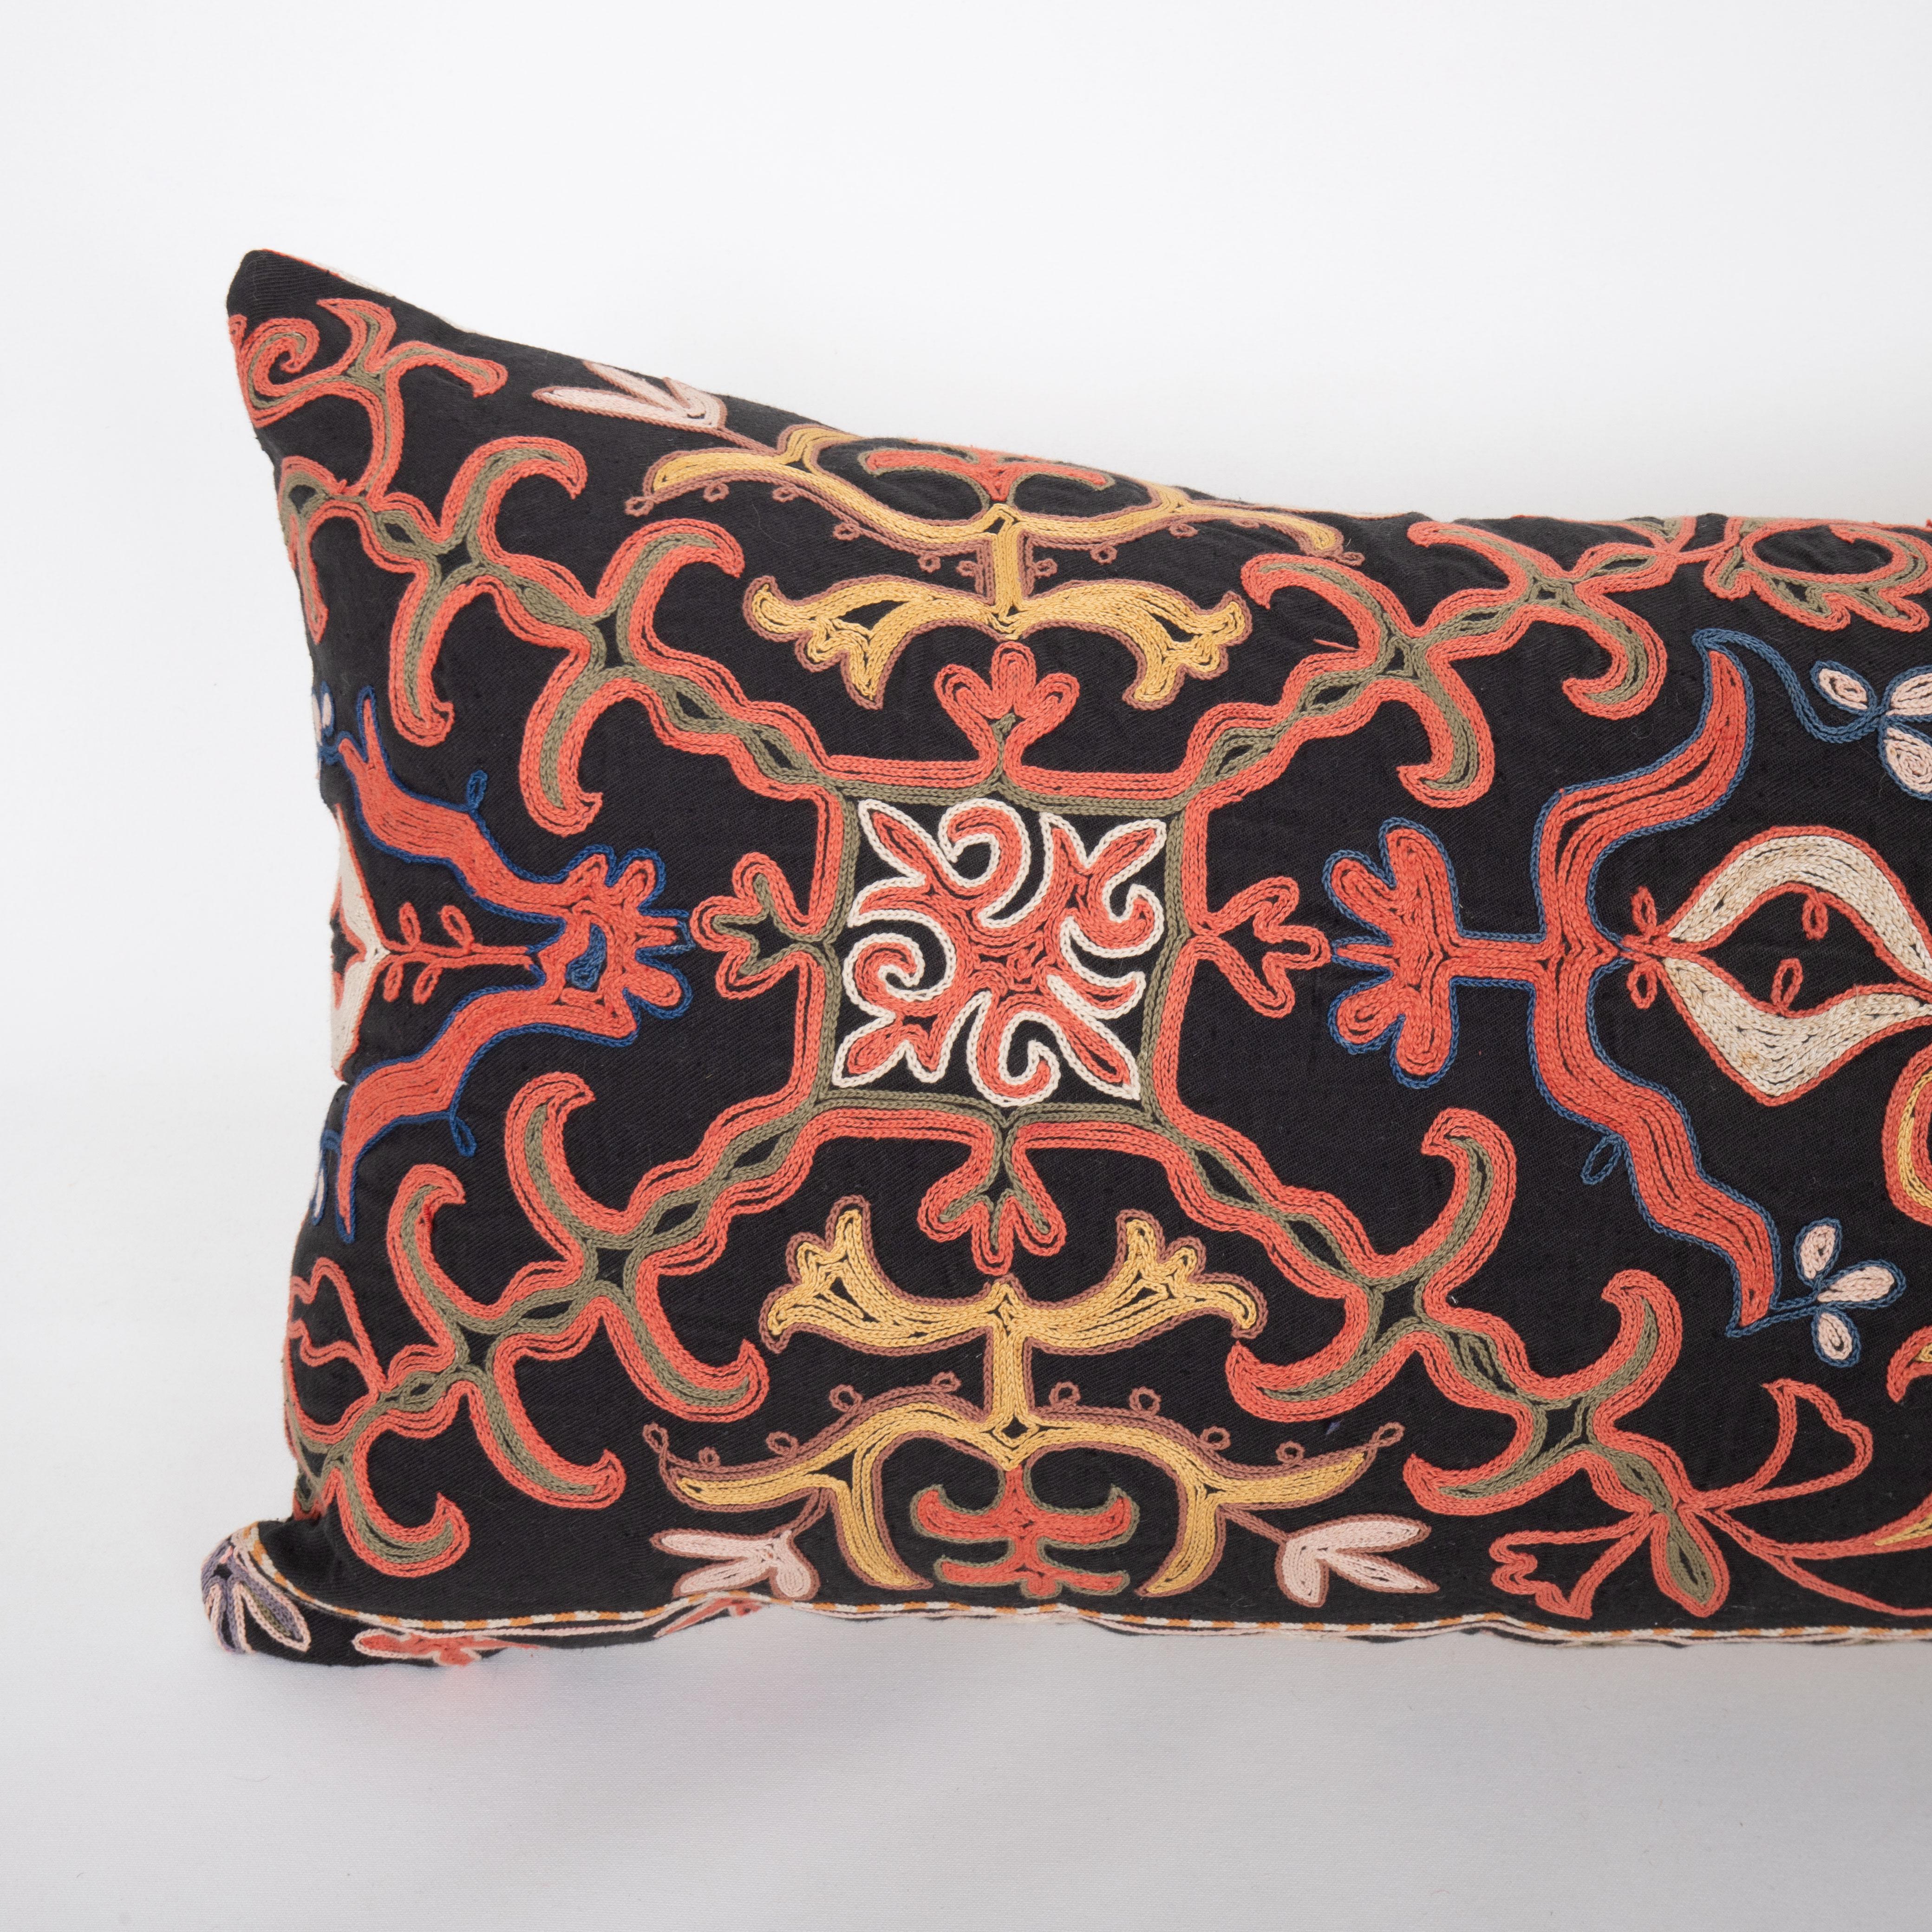 Suzani Pillowcase made from a mid 20th. C. Kazakh / Kyrgyz Embroidery For Sale